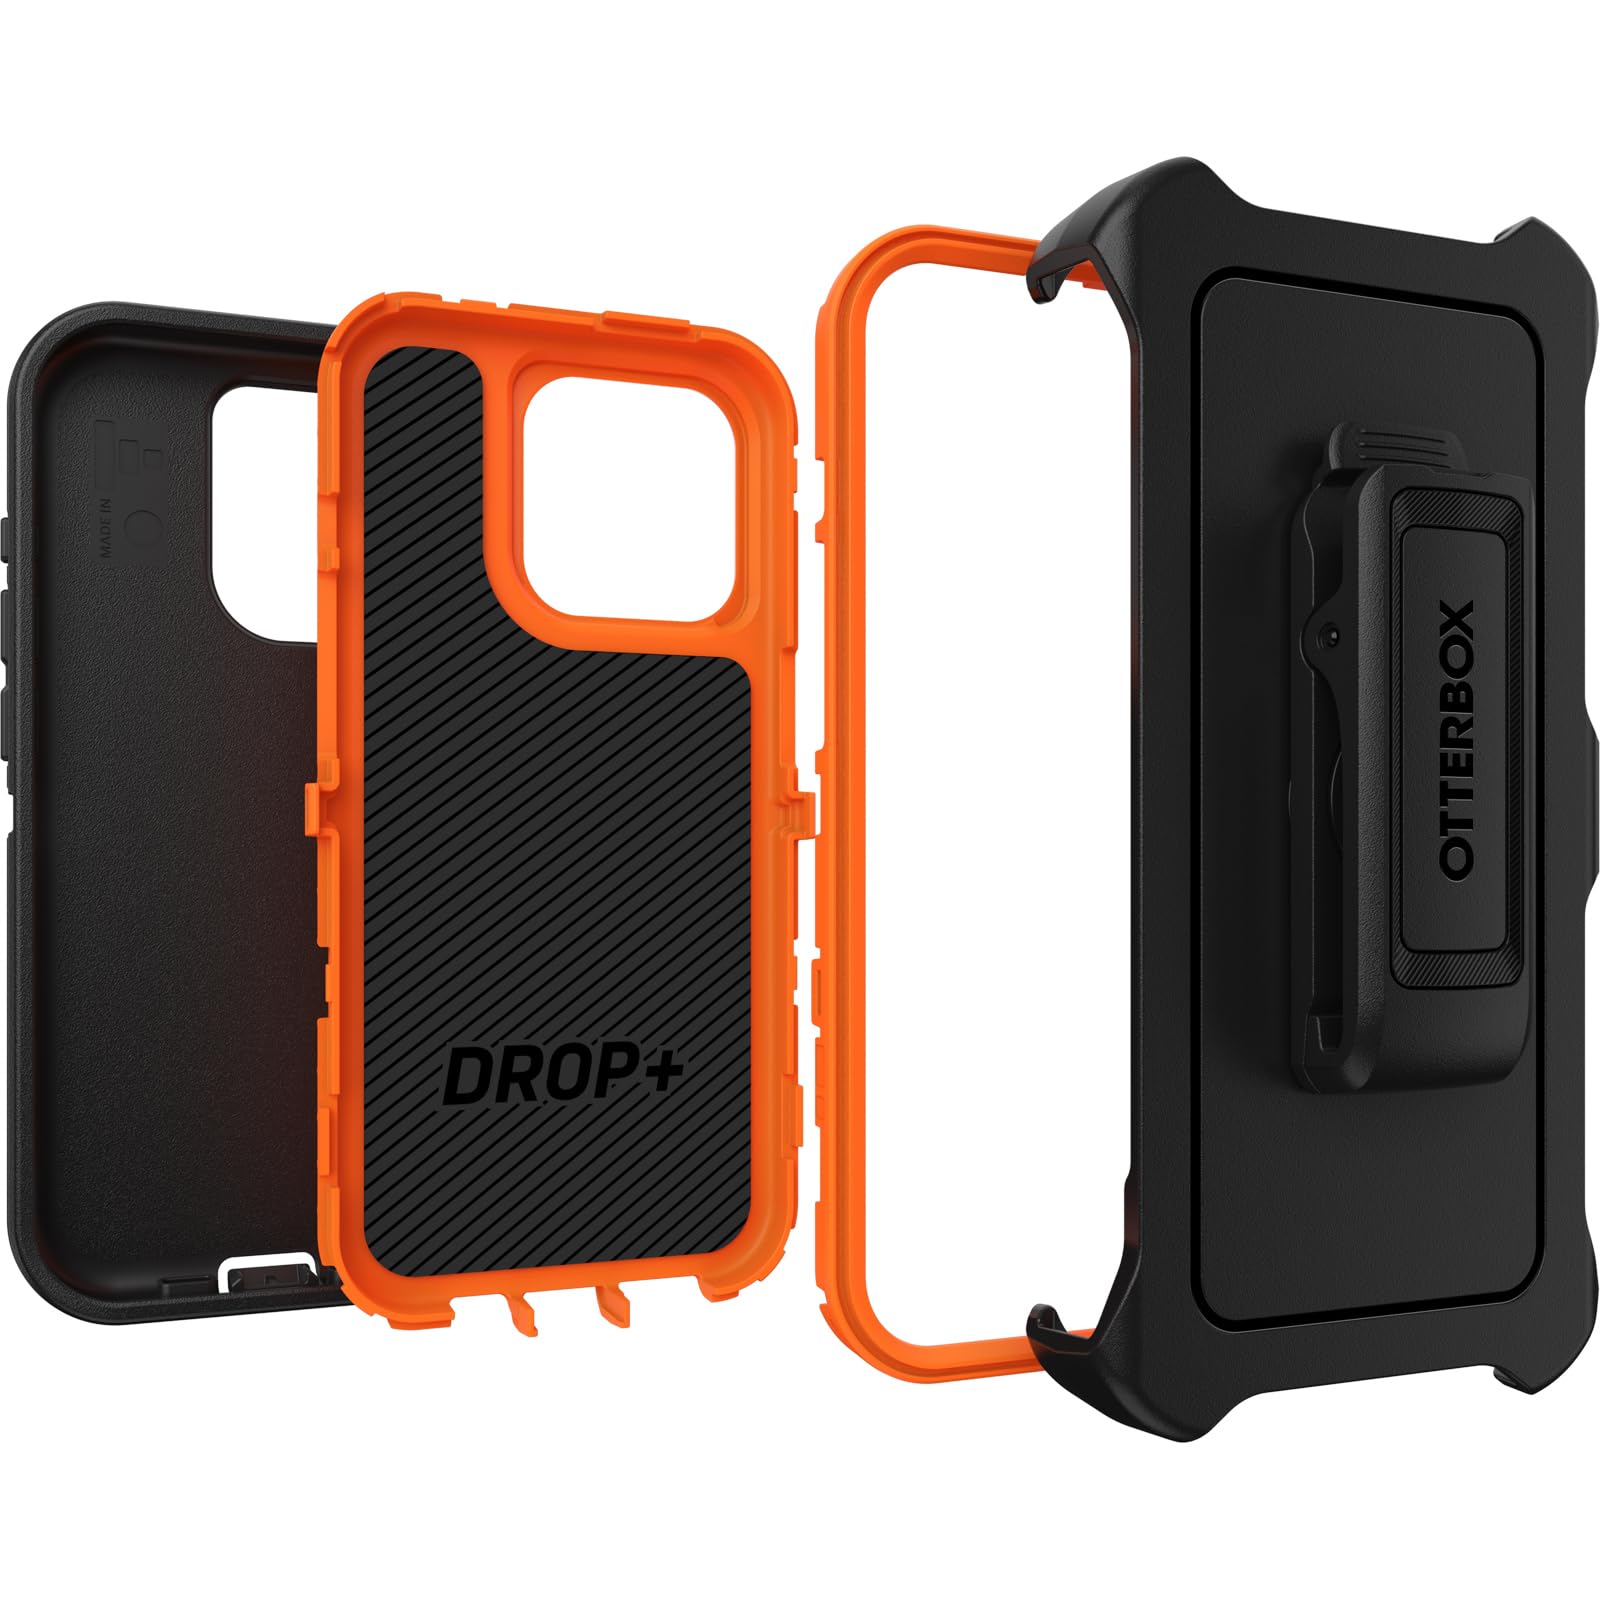 OtterBox iPhone 15 Pro (Only) Defender Series Case - REALTREE EDGE (Blaze Orange/Black/RT Edge) , rugged & durable, with port protection, includes holster clip kickstand